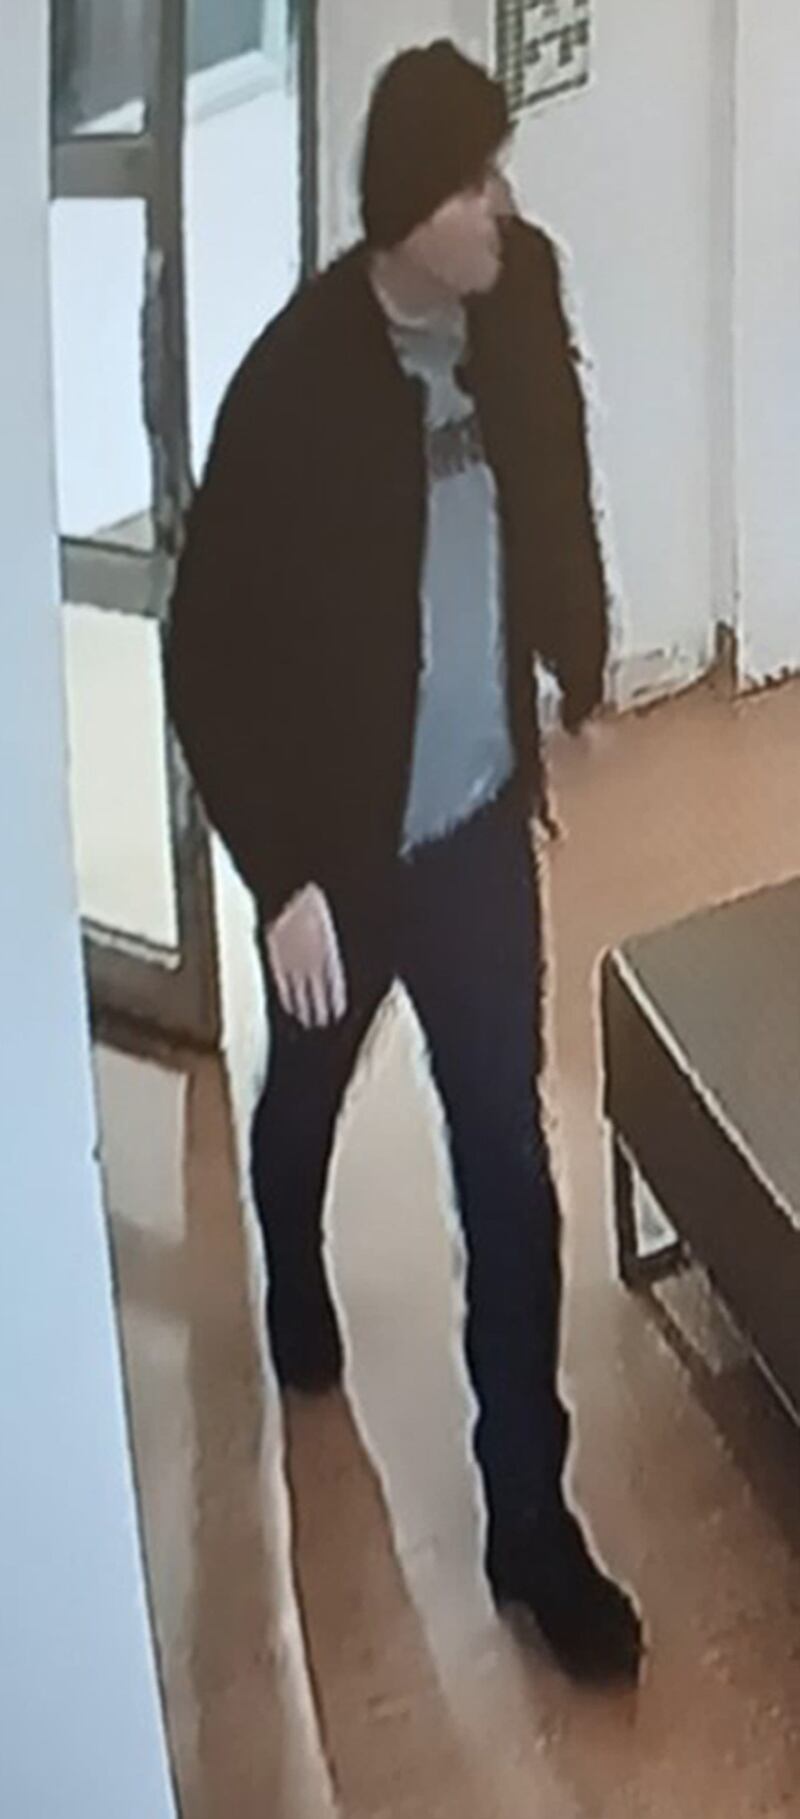 A CCTV image of Philip Theophilou who has been found after he absconded from a mental health facility in east London, sparking a police appeal